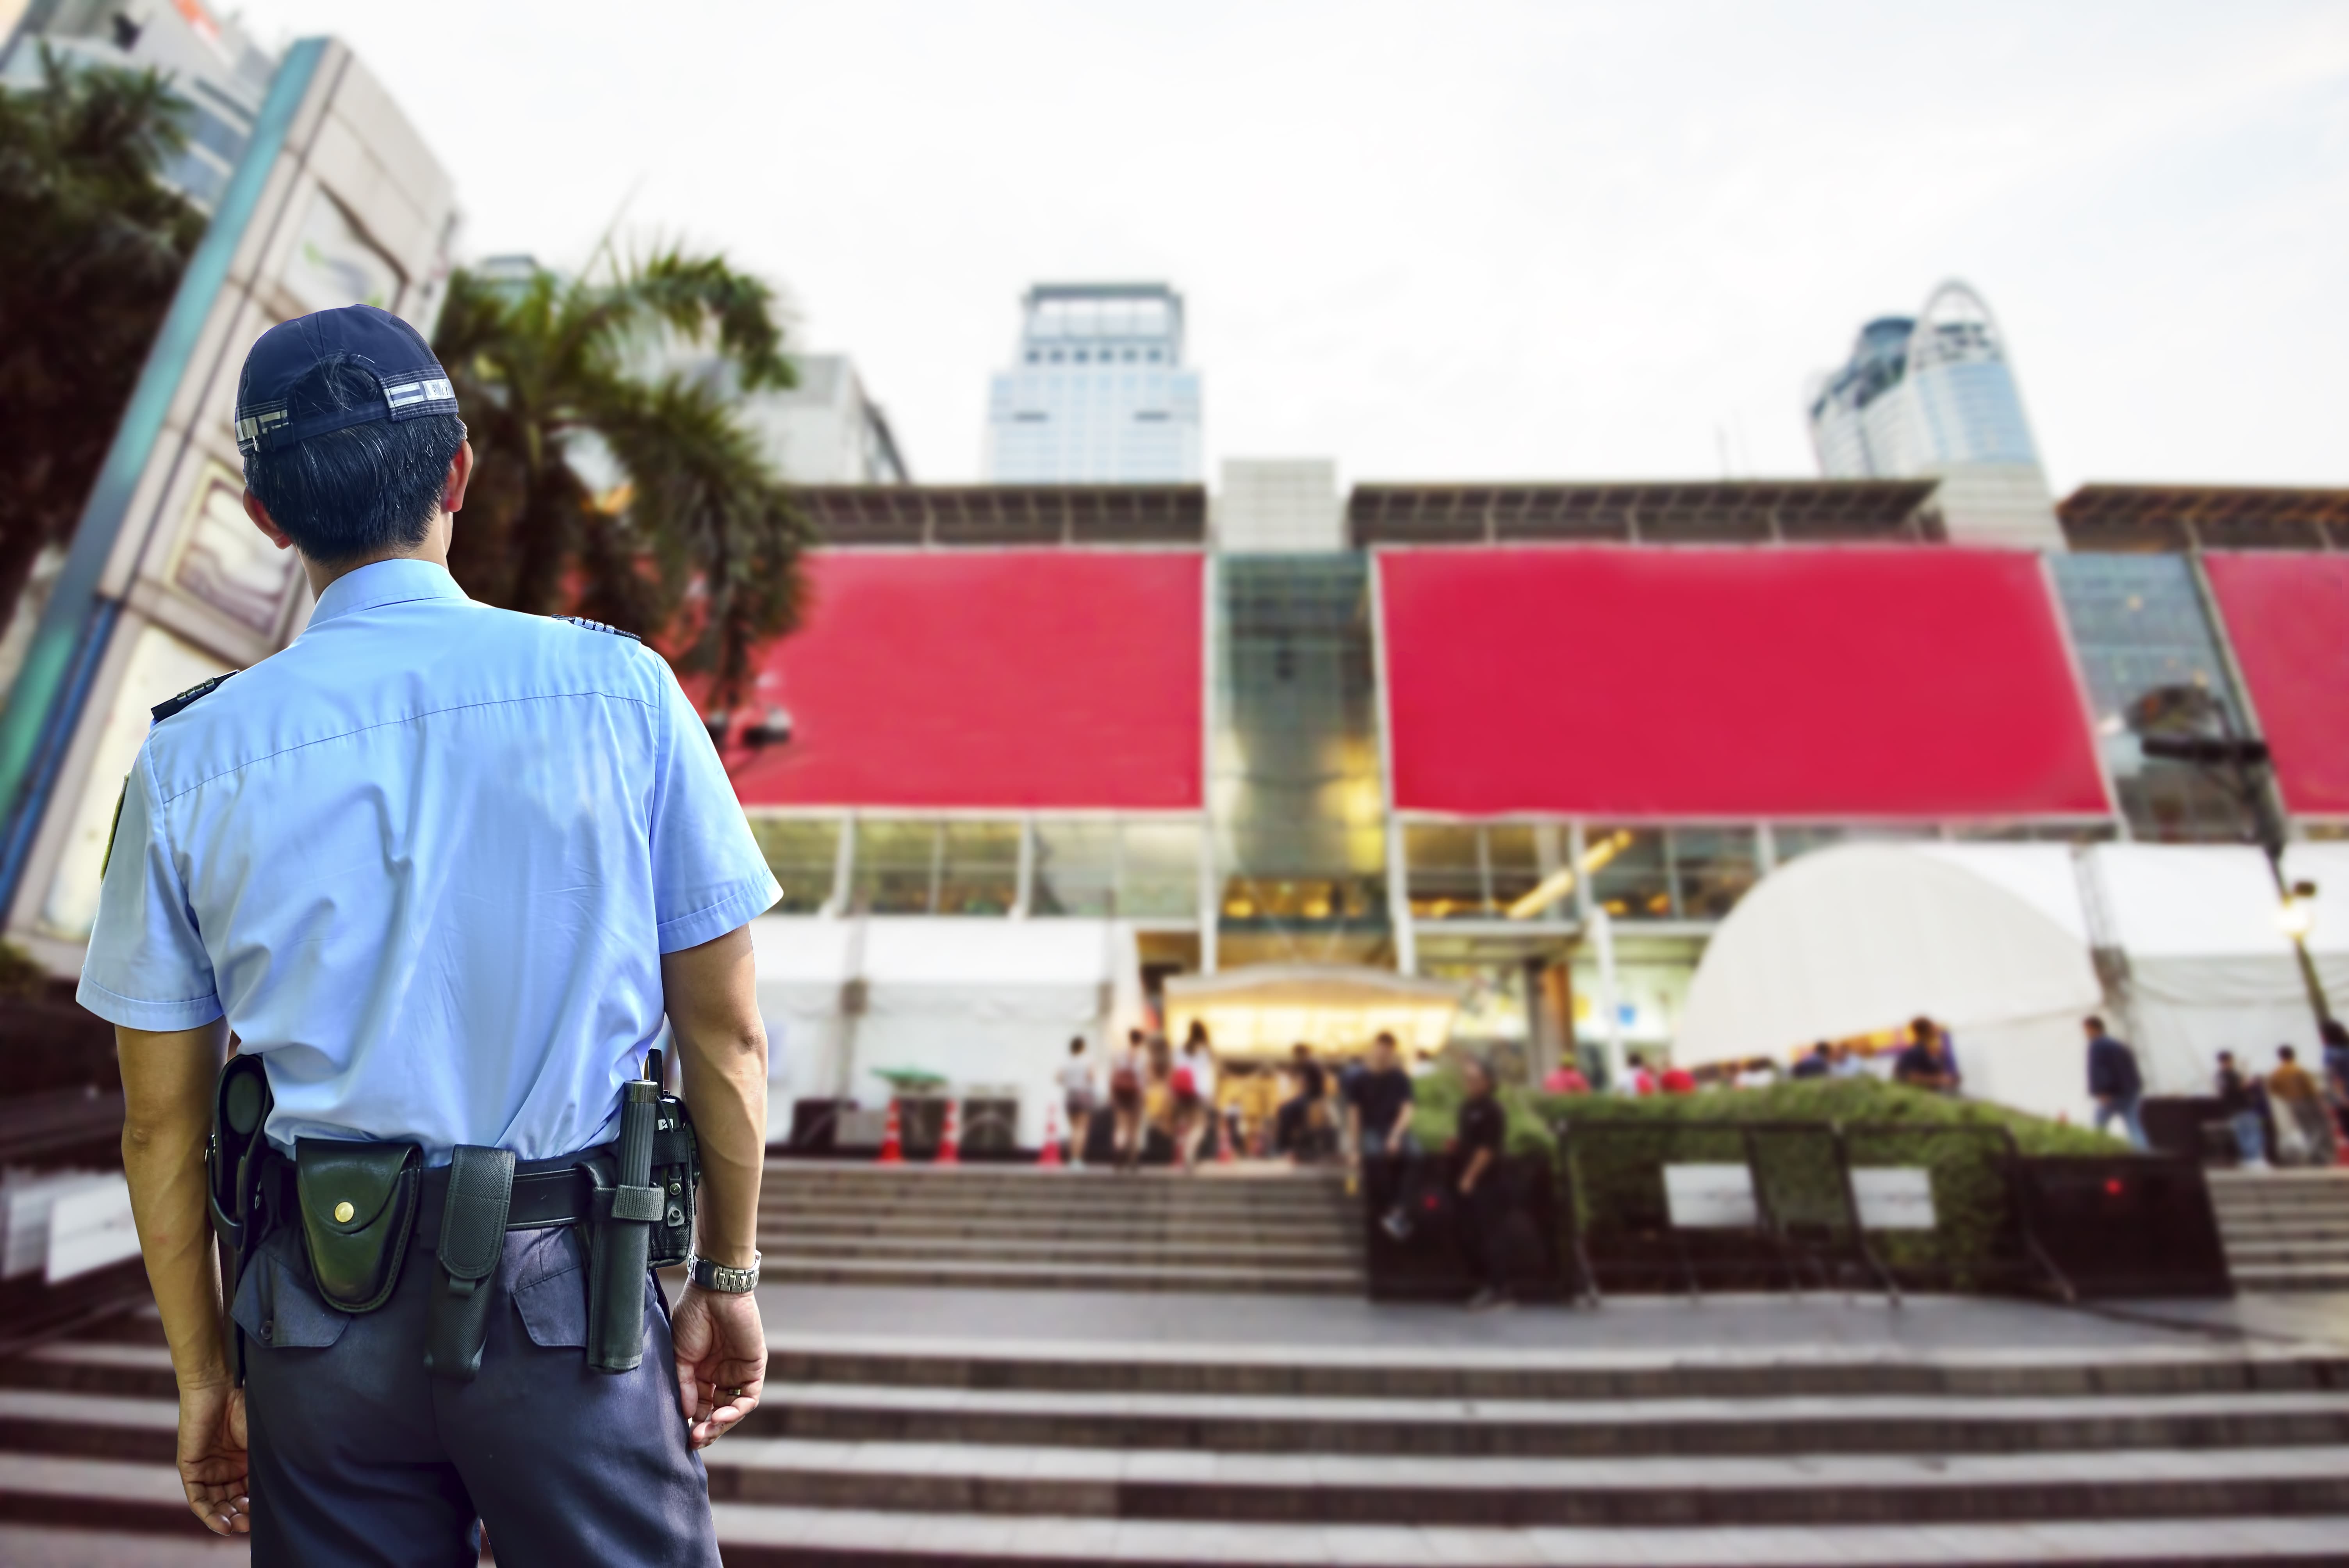 How do Security Officers Protect the Outside of a Shopping Mall?